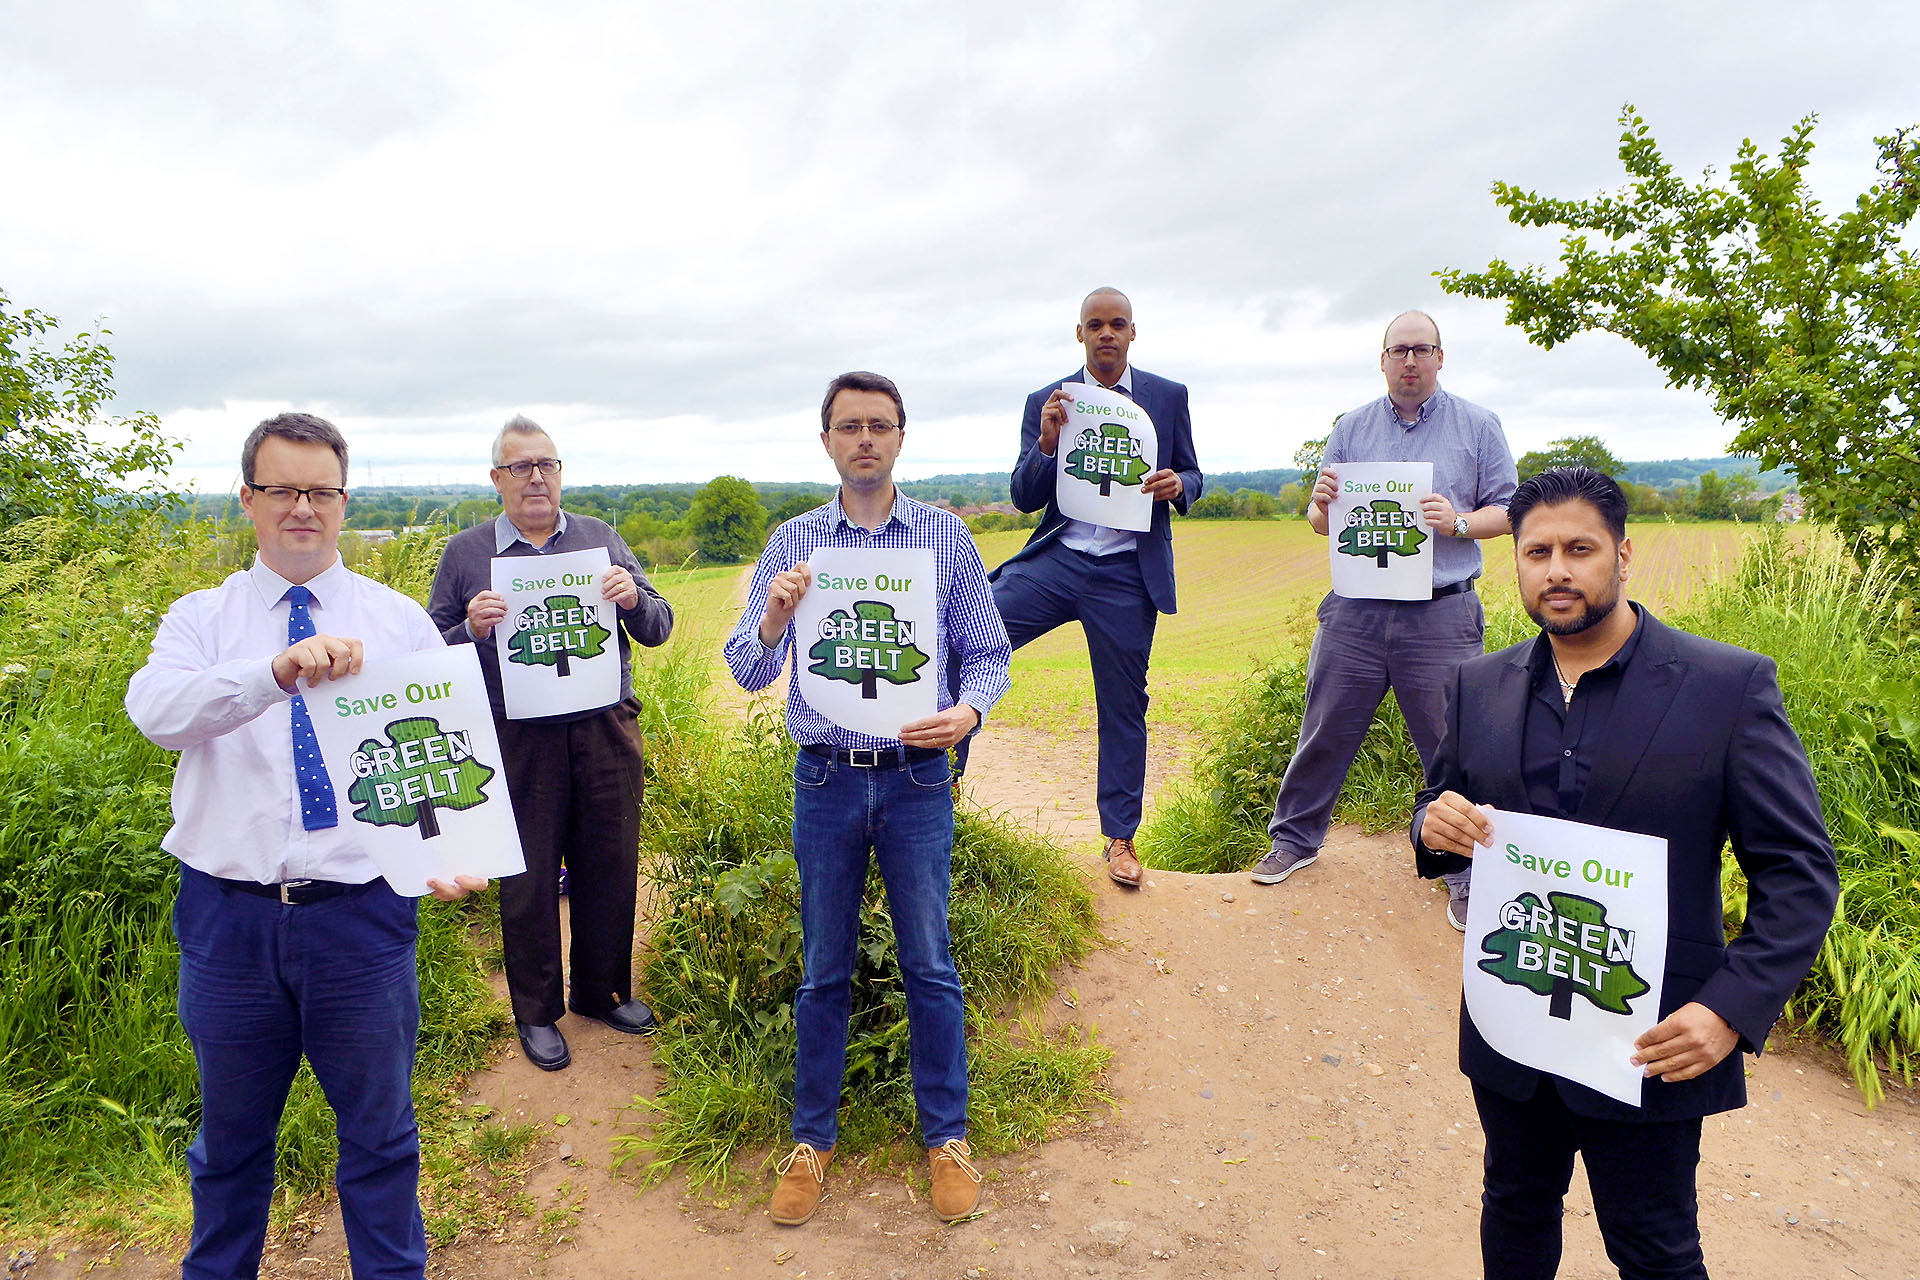 Mike Wood MP with Cllr Peter Miller, Cllr Ed Lawrence, Cllr Luke Johnson, Cllr Phil Atkins and Cllr Shaz Saleem fighting to save our green belt at Kingswinford Triangle and Holbeache